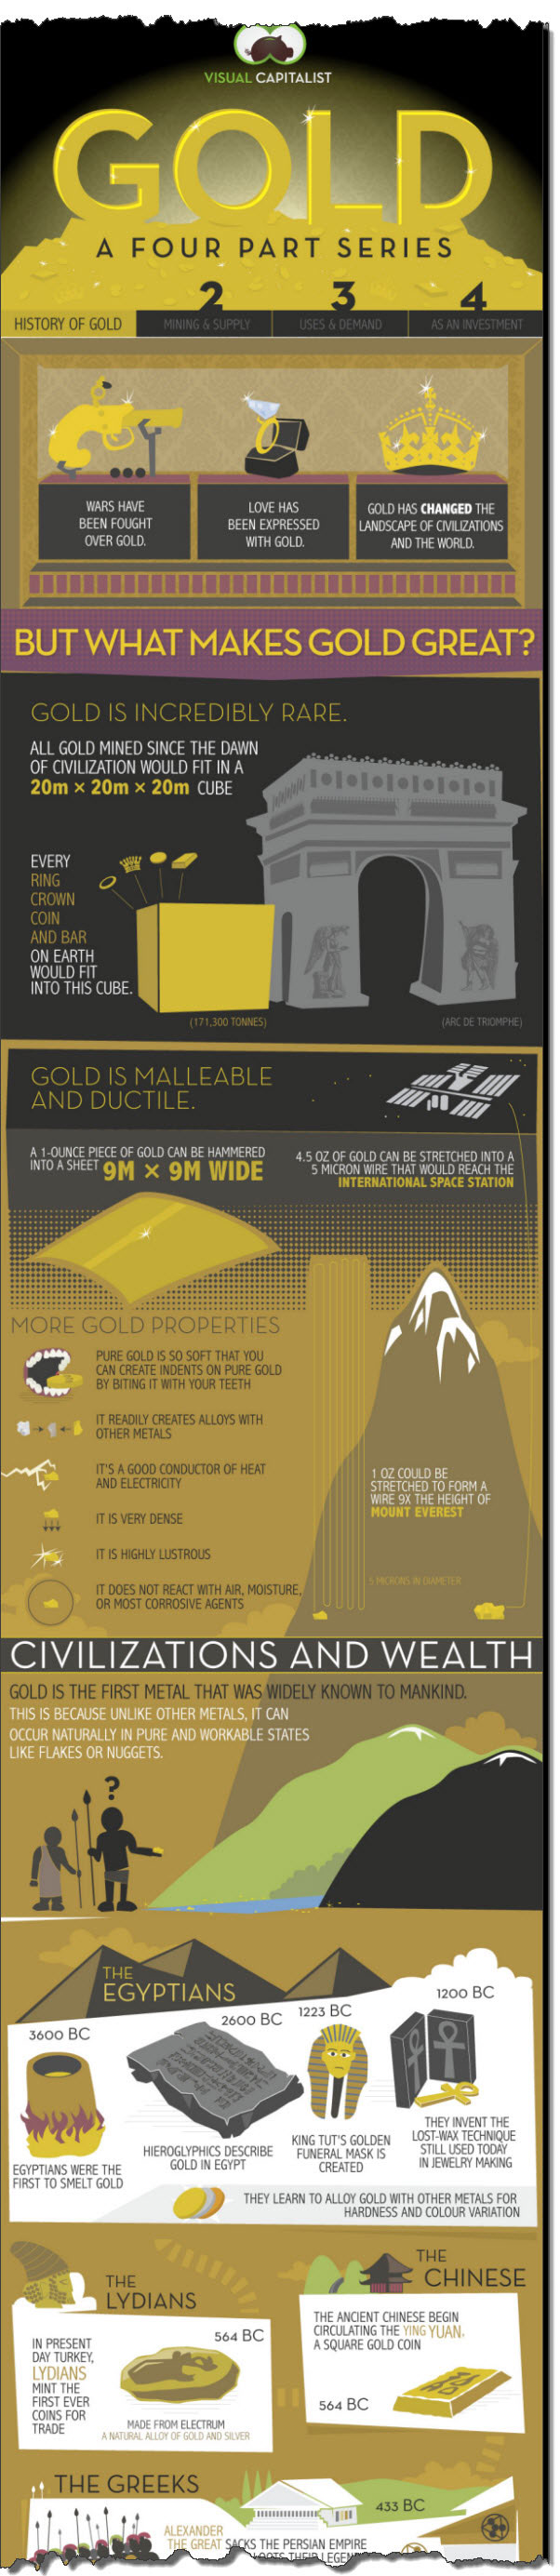 gold-history-infographic1